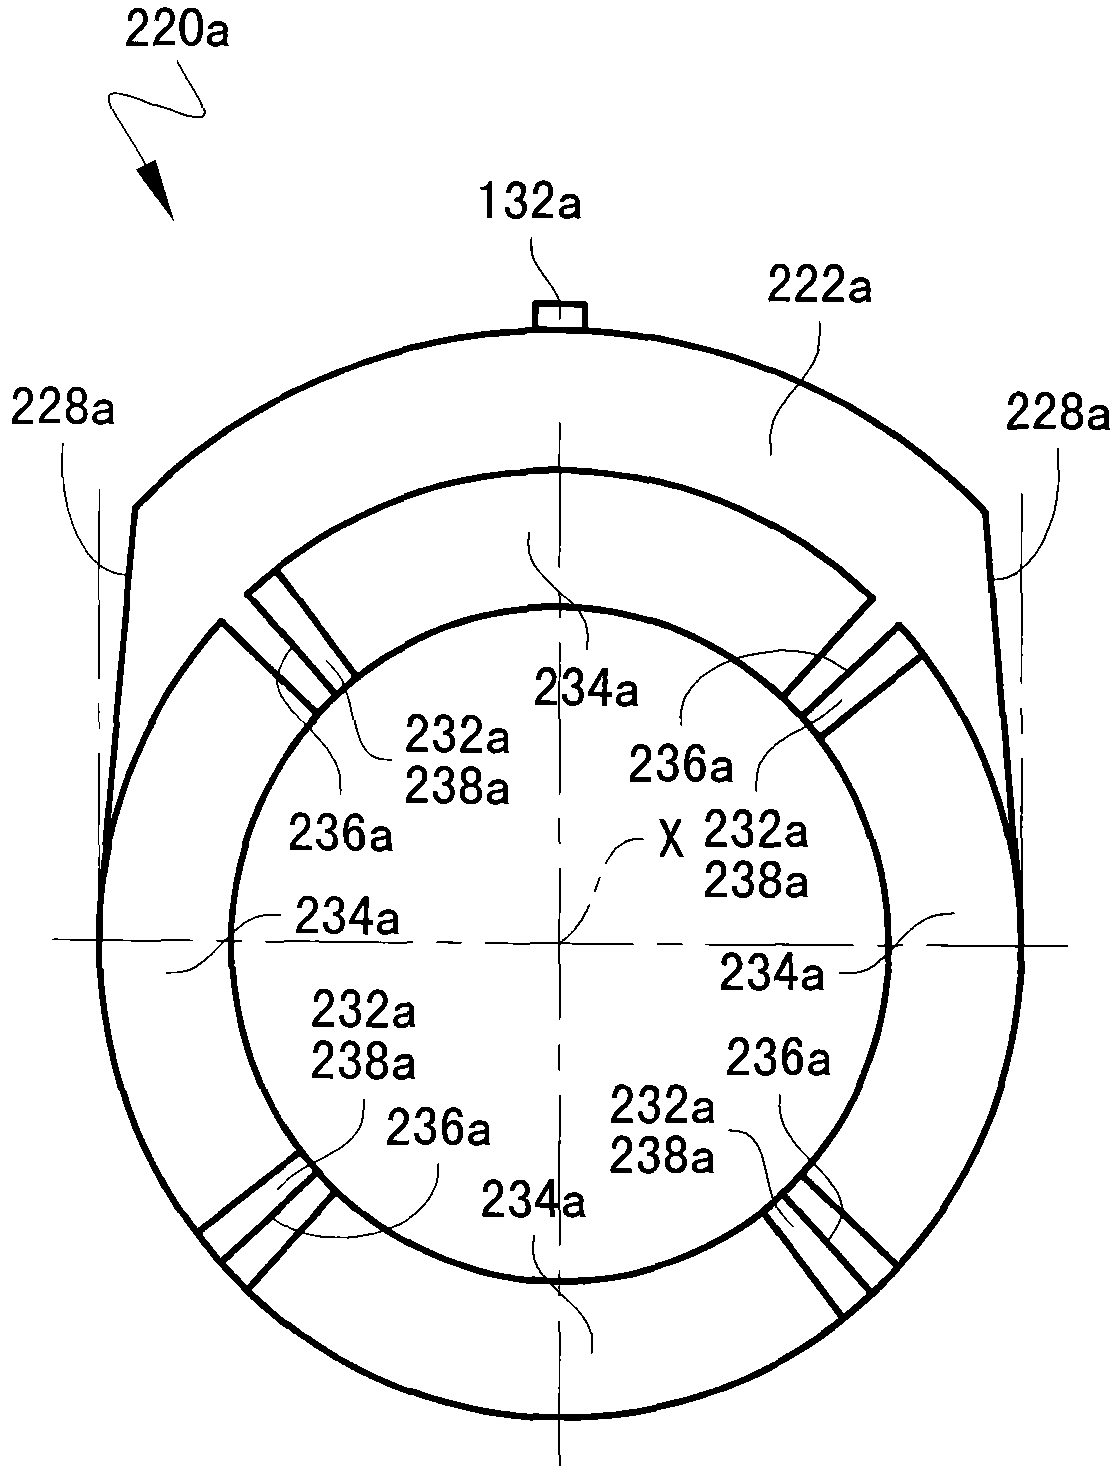 Spatial wedge type double-clutch